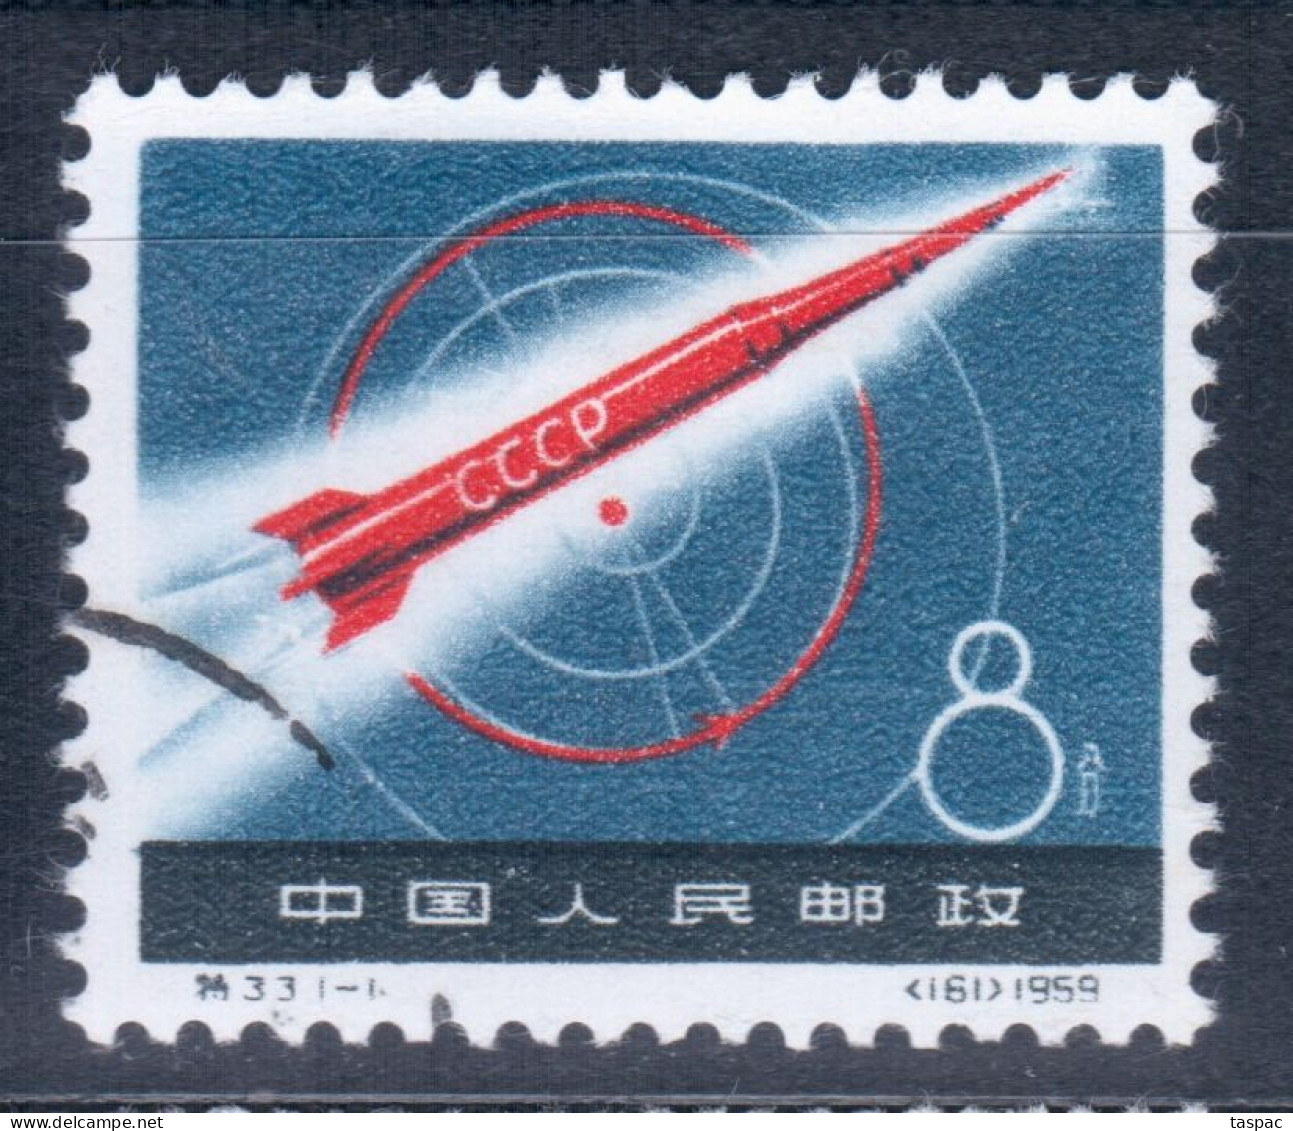 China P.R. 1959 Mi# 453 Used - Launching Of First Russian Space Rocket - Gebraucht